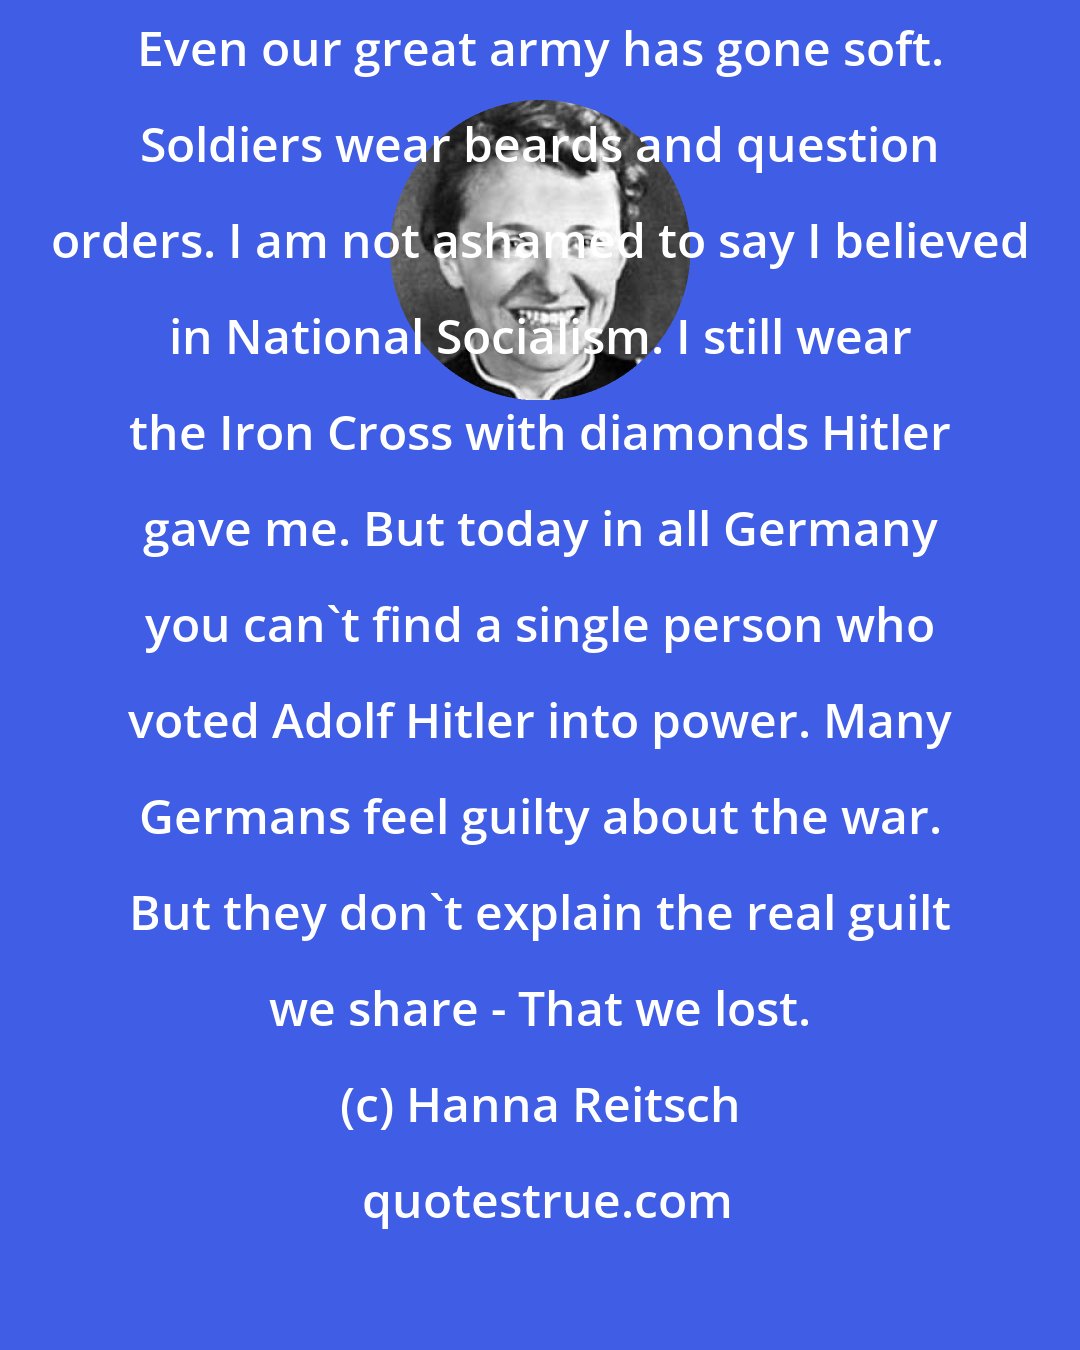 Hanna Reitsch: And what have we now in Germany? A land of bankers and car-makers. Even our great army has gone soft. Soldiers wear beards and question orders. I am not ashamed to say I believed in National Socialism. I still wear the Iron Cross with diamonds Hitler gave me. But today in all Germany you can't find a single person who voted Adolf Hitler into power. Many Germans feel guilty about the war. But they don't explain the real guilt we share - That we lost.